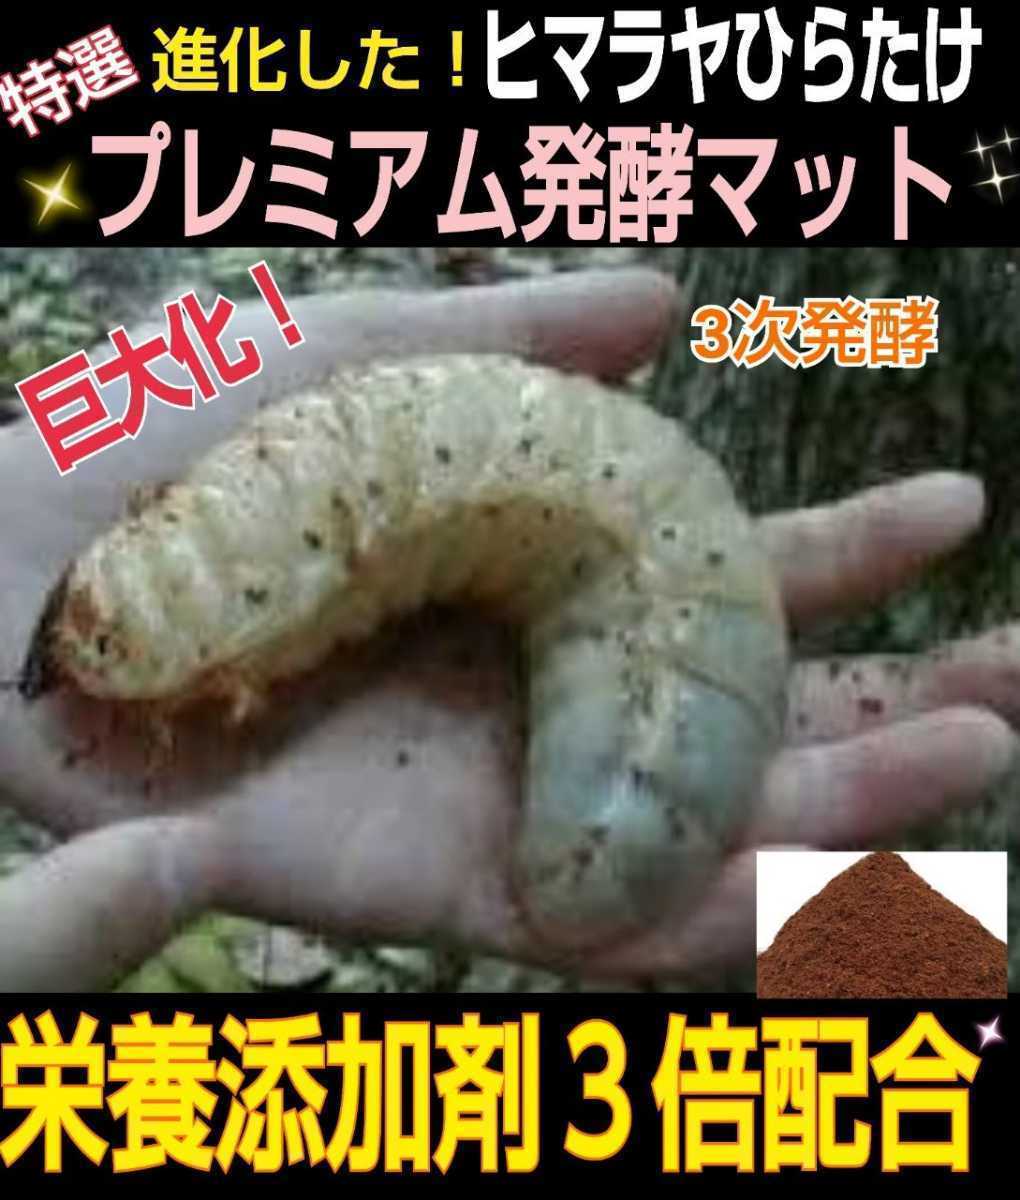  evolved! premium 3 next departure . rhinoceros beetle mat * special amino acid etc. nutrition addition agent .3 times combination!tore Hello s, royal jelly strengthen * the smallest particle finishing!